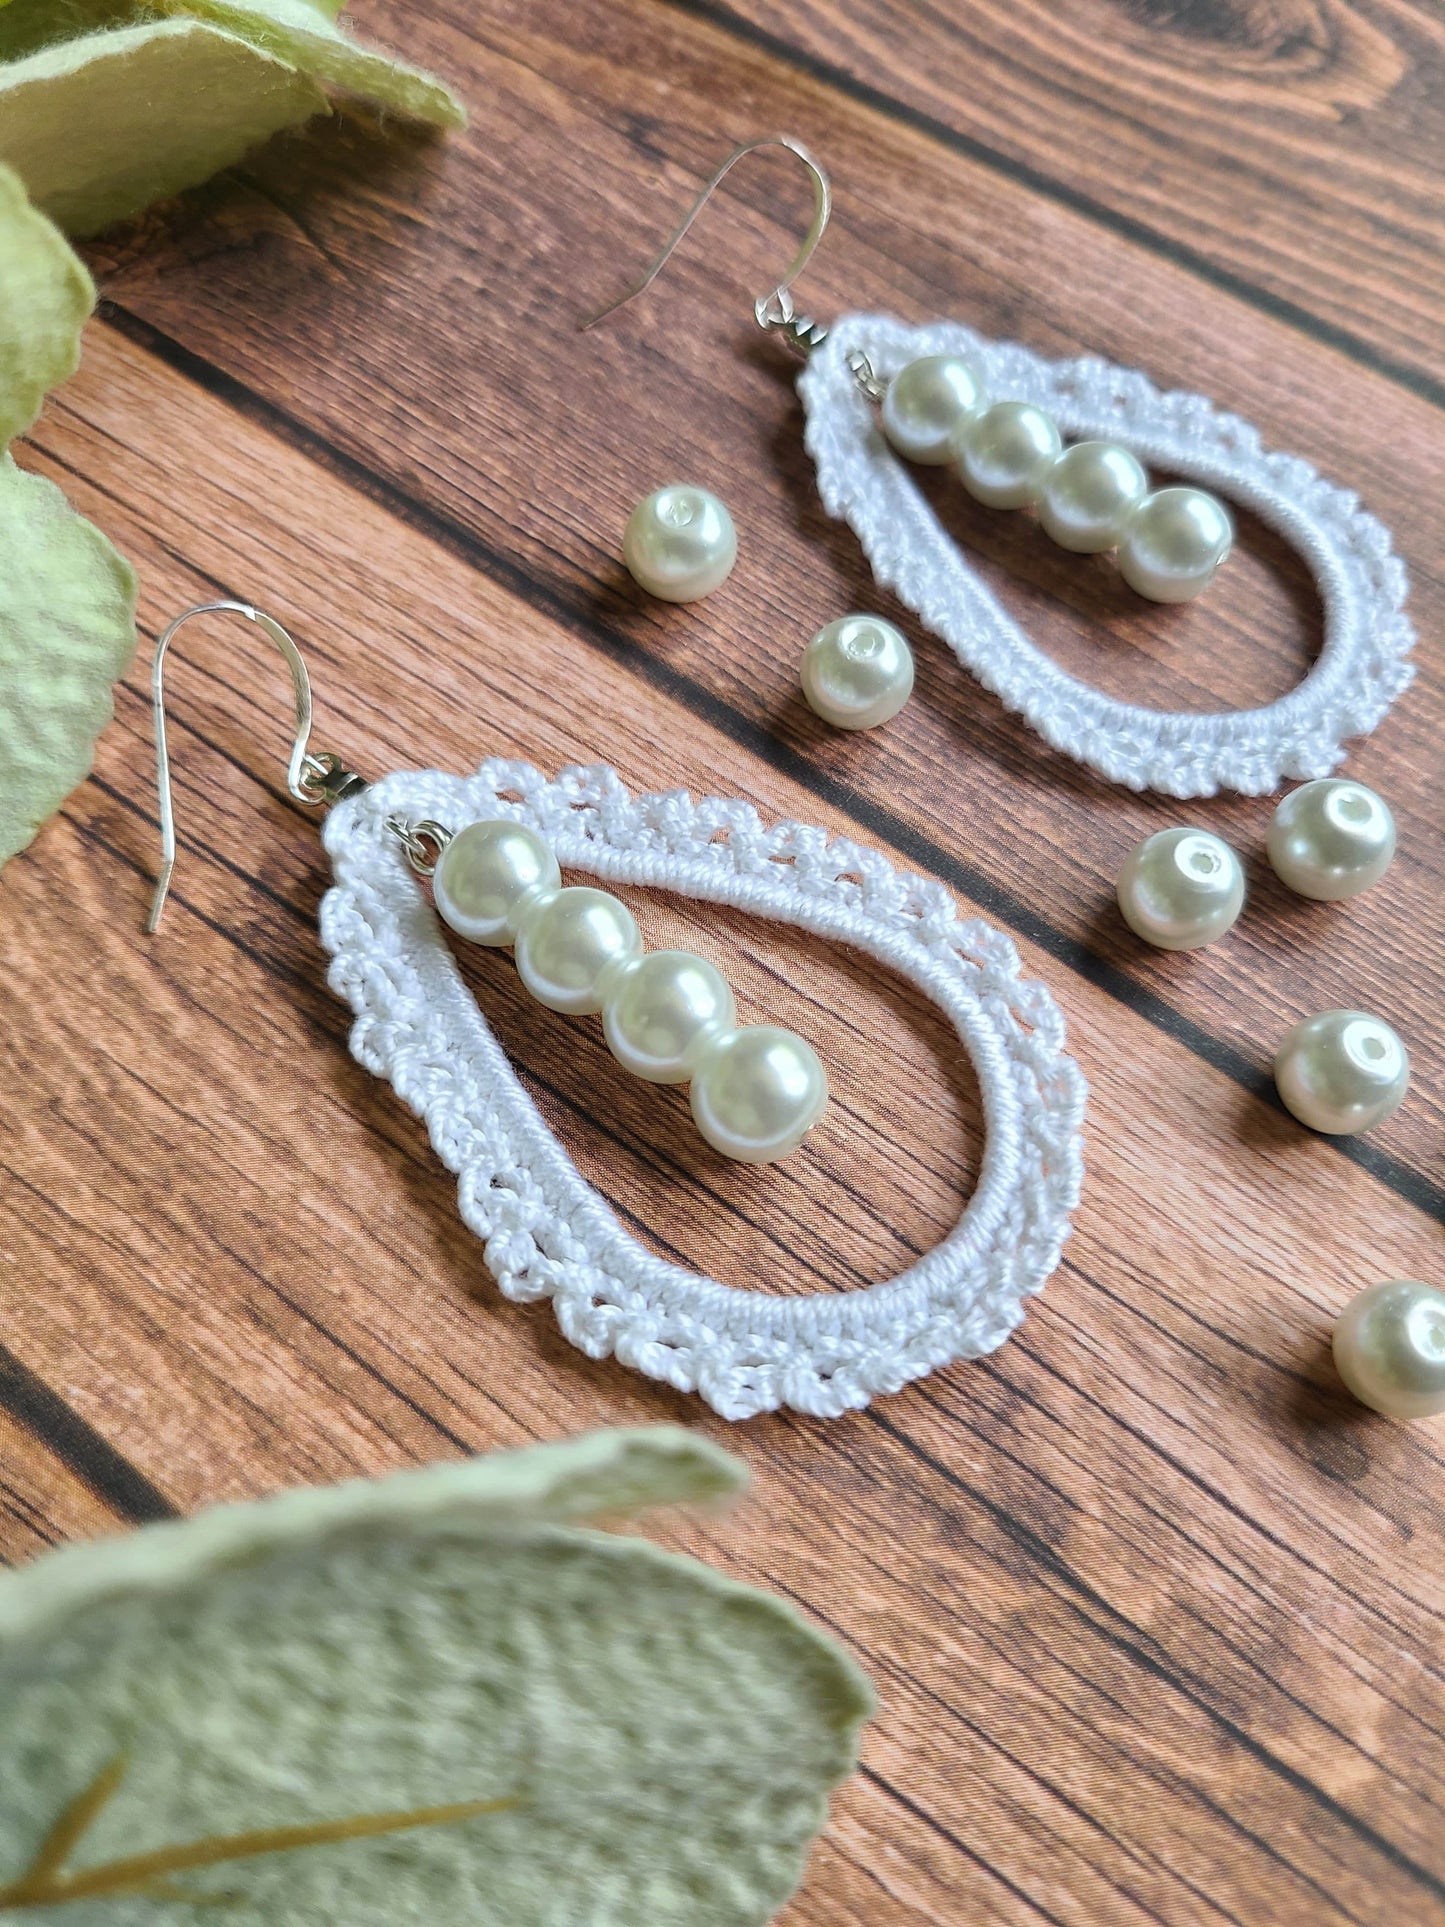 Laced crochet earrings in tear drop shape with a line of pearls in the middle.